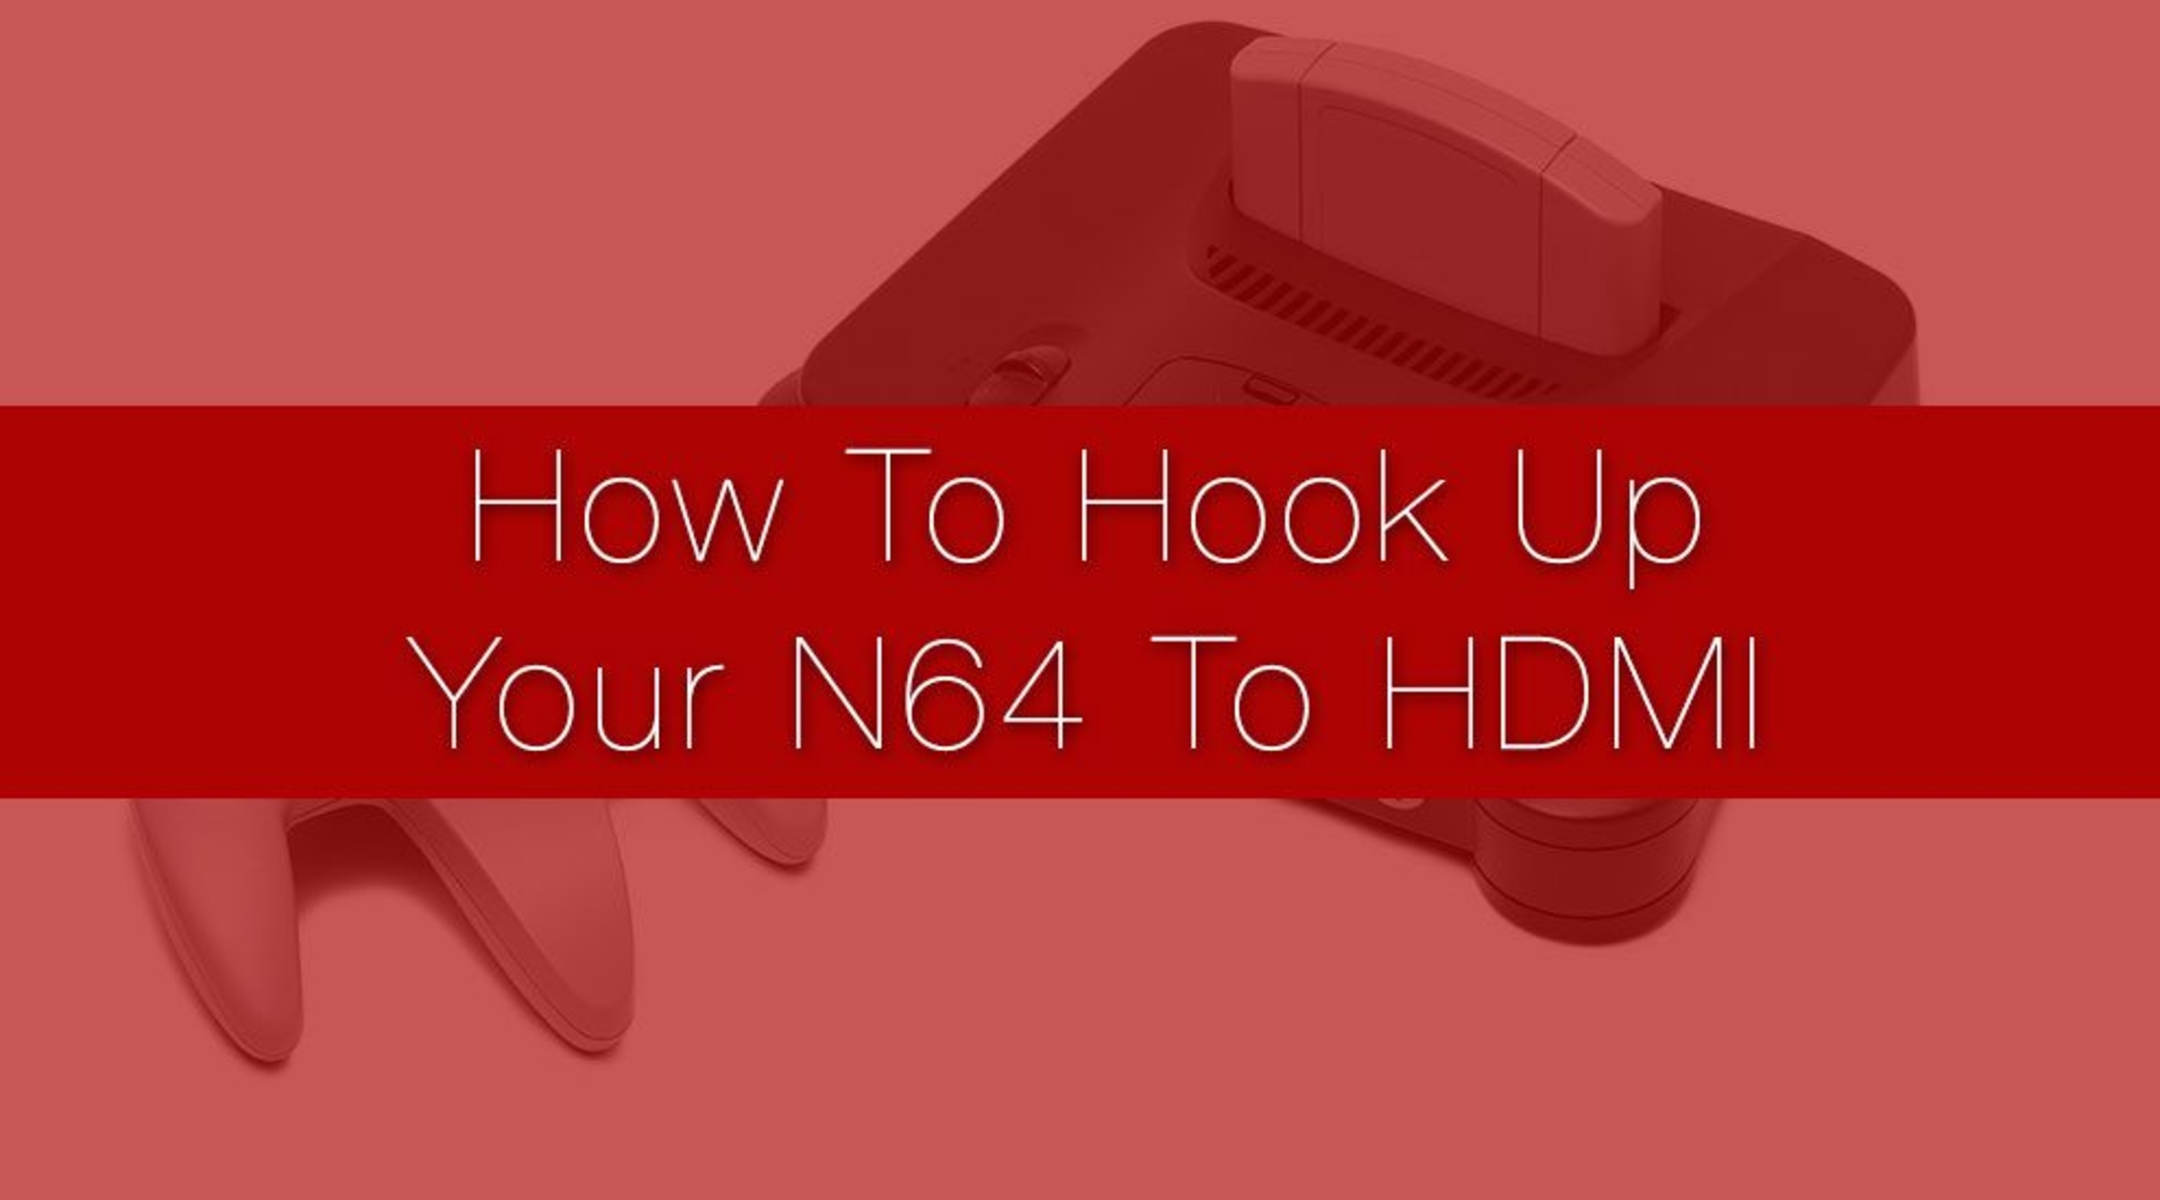 How To Hook Up N64 To HDMI